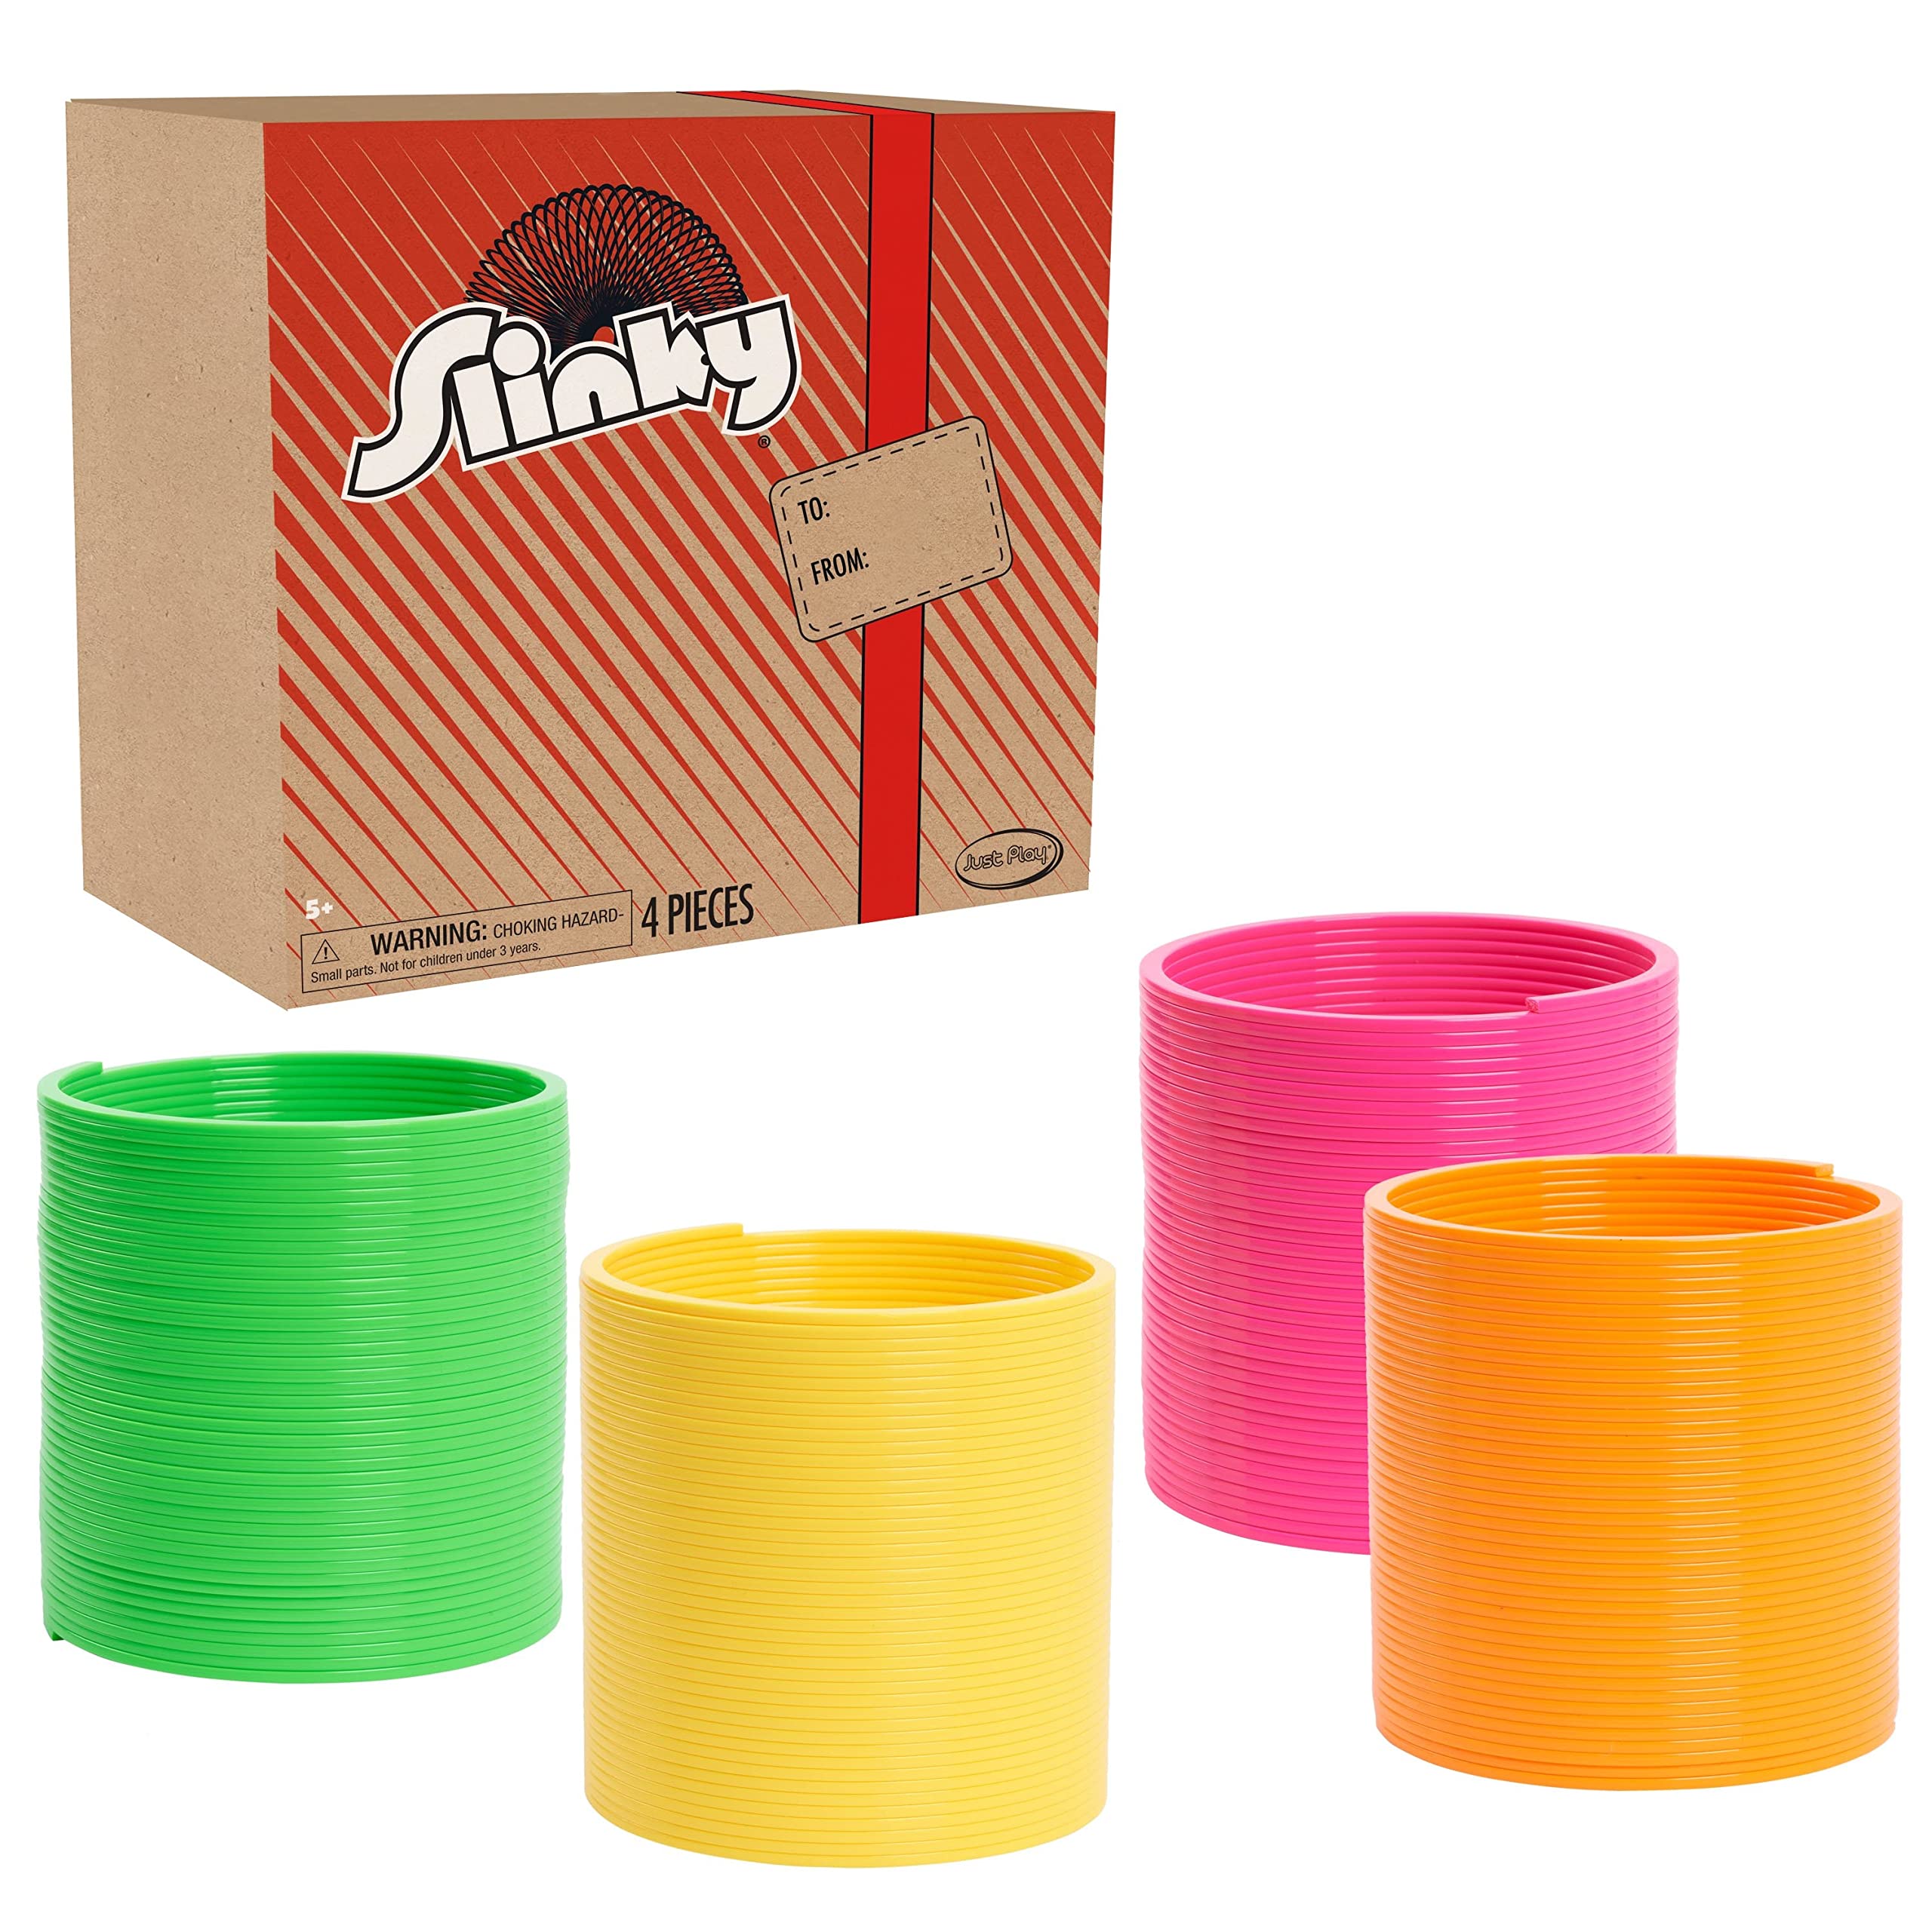 Prime Members: 4-Count Slinky the Original Walking Spring Toy $6 + Free Shipping